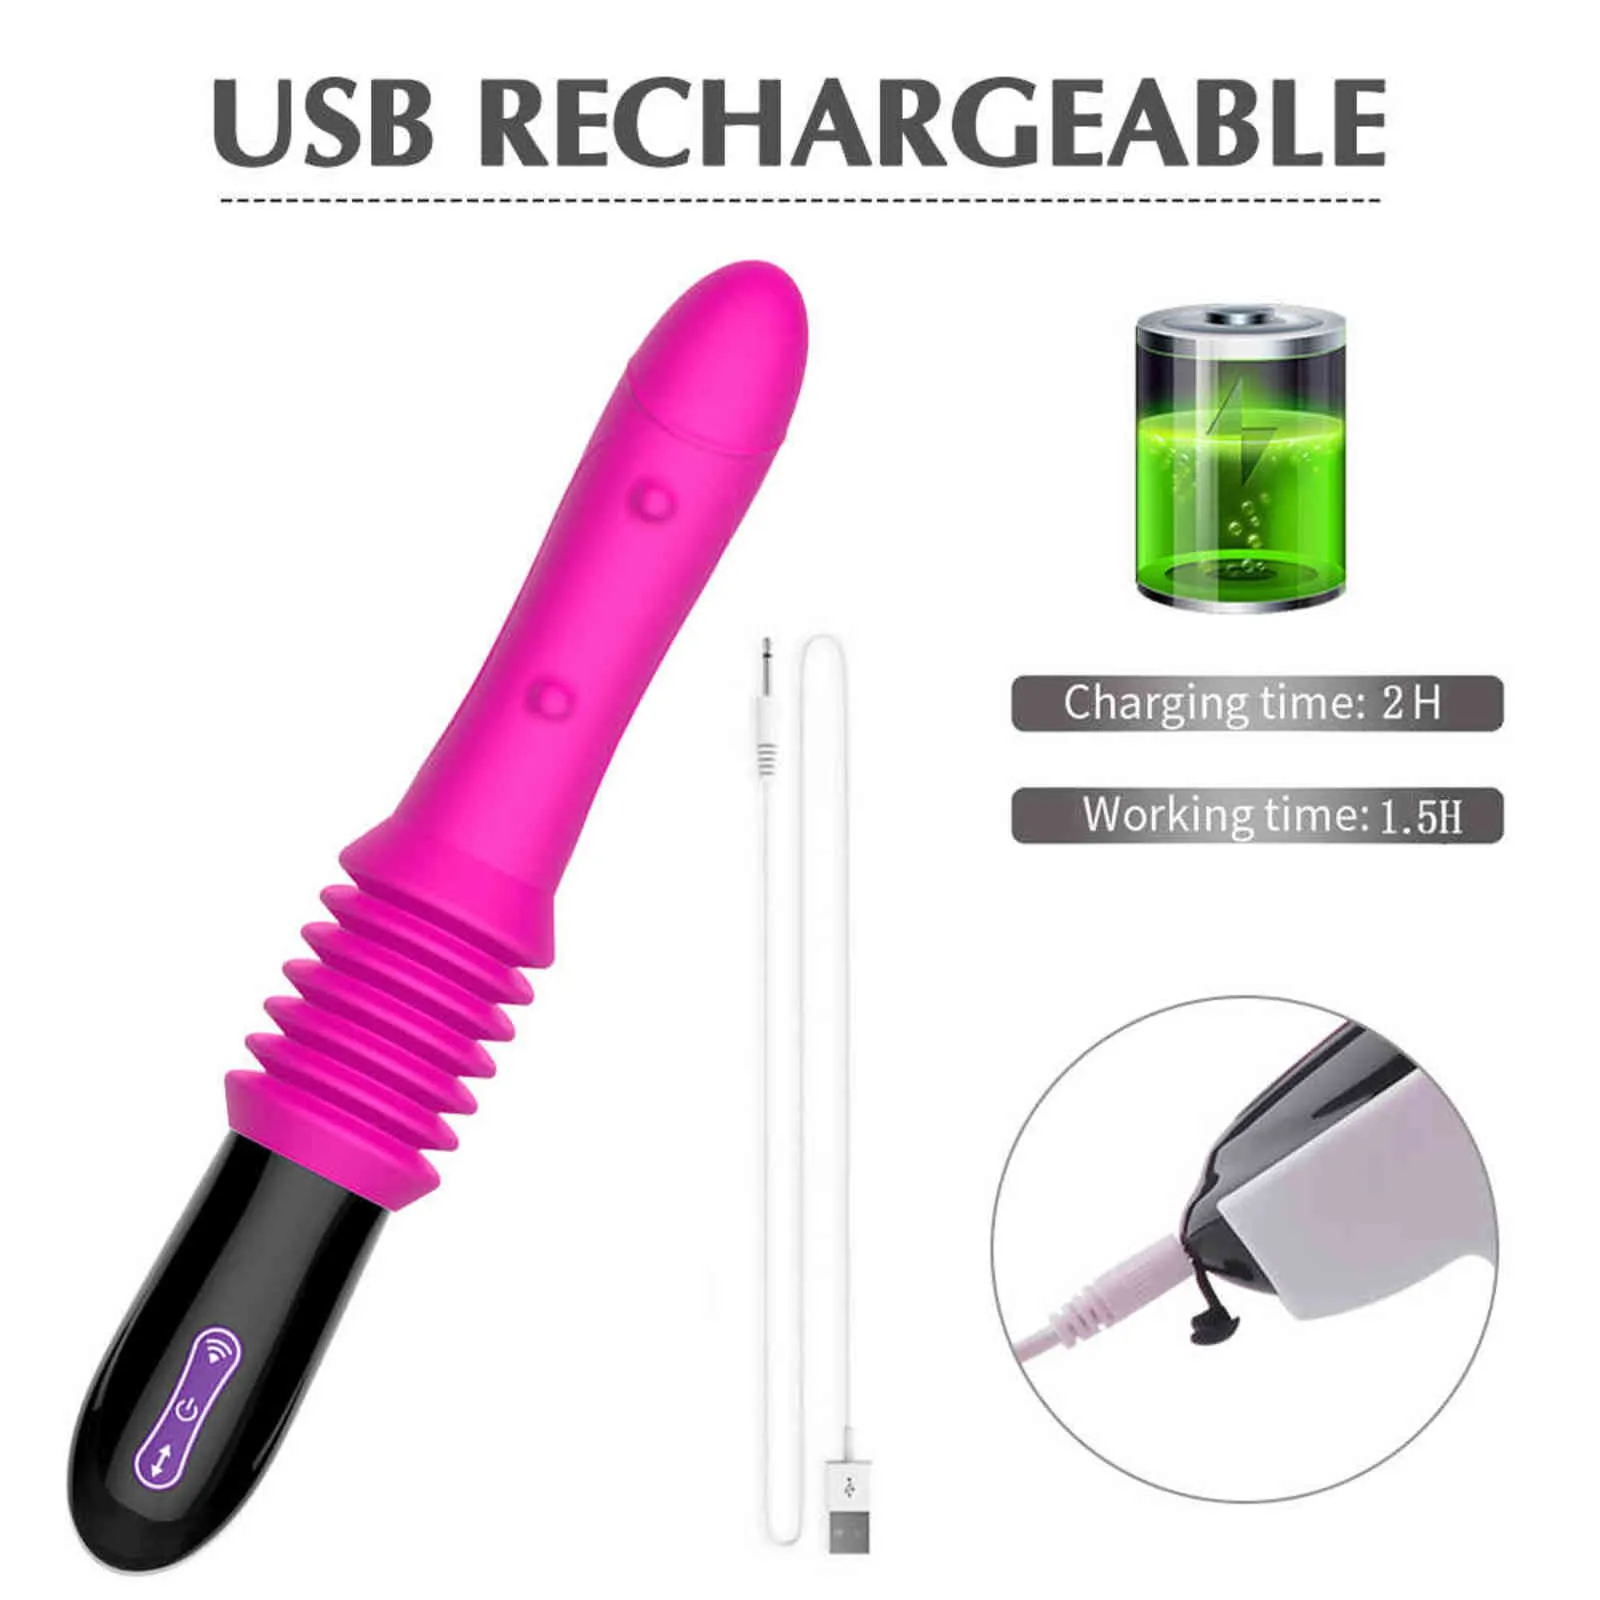 Nxy Vibrators Sex Thrusting Dildo Automatic g Spot Suction Game for Women Fun Anal Massage Orgasm 11093217642